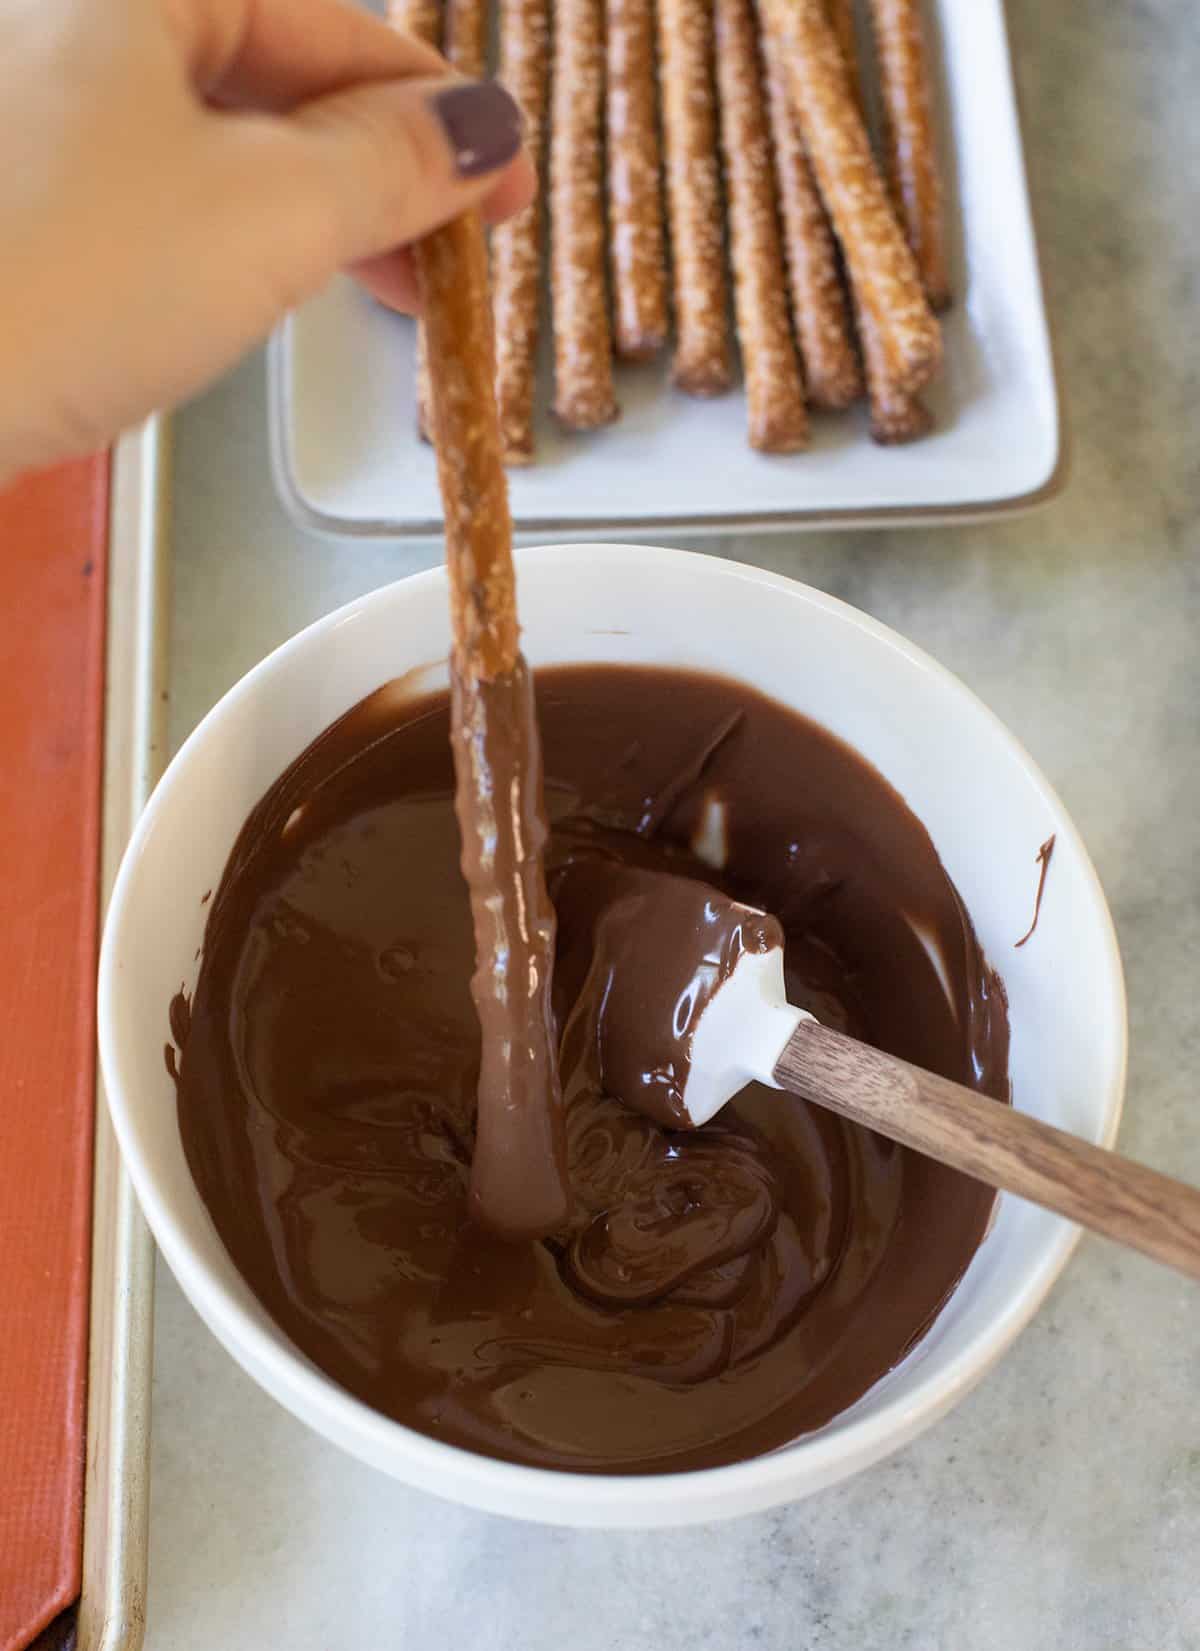 dipping a pretzel rod into melted chocolate 